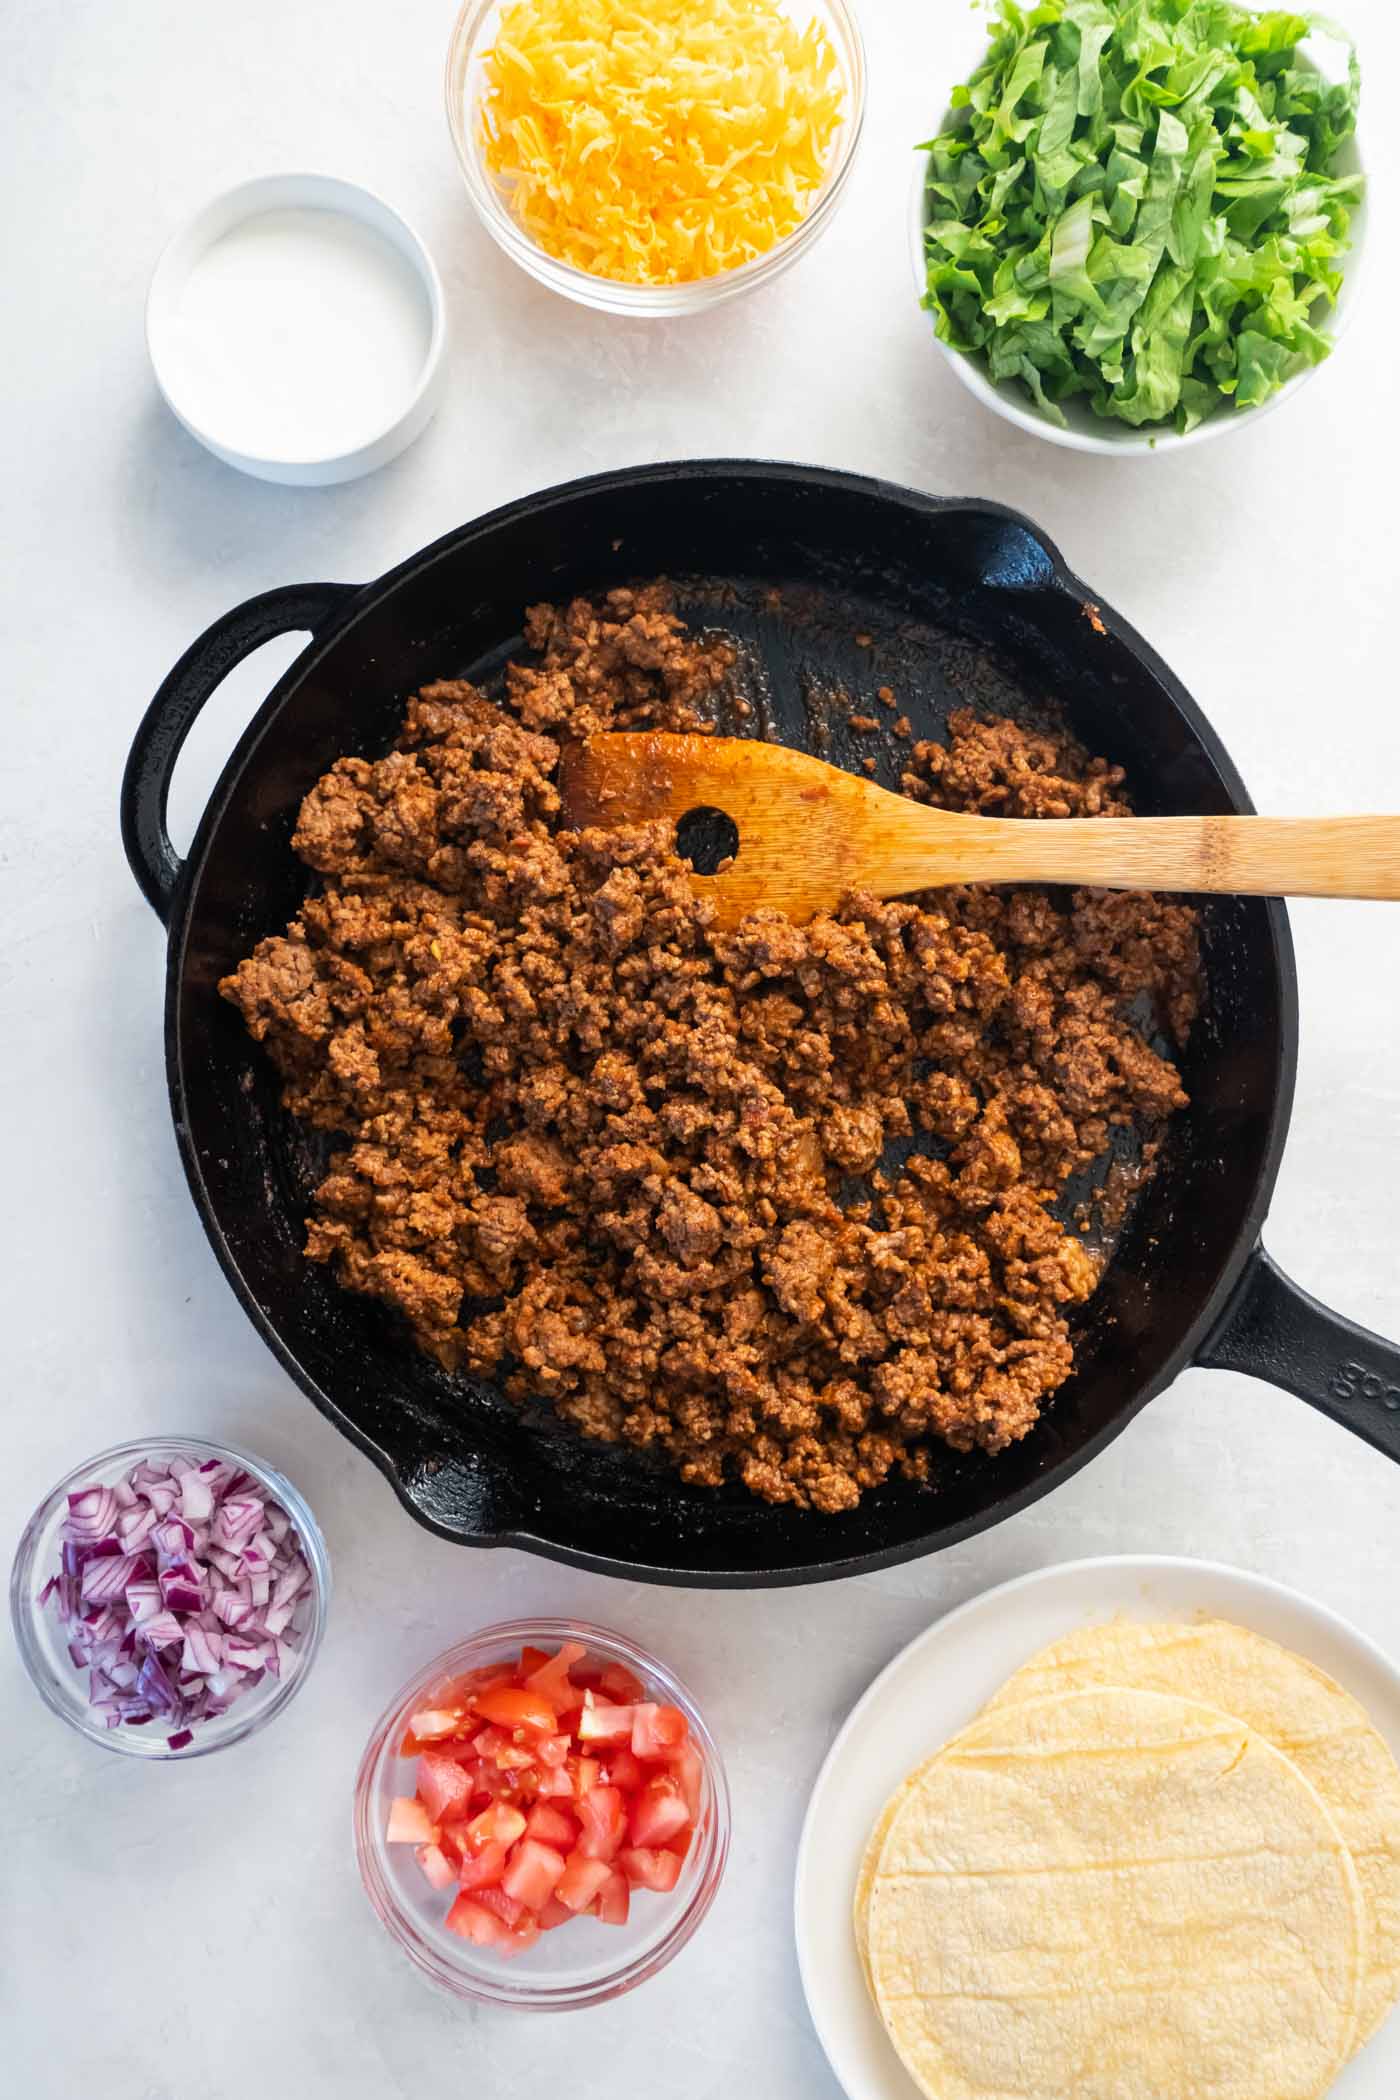 Taco meat in skillet with taco toppings in bowls.